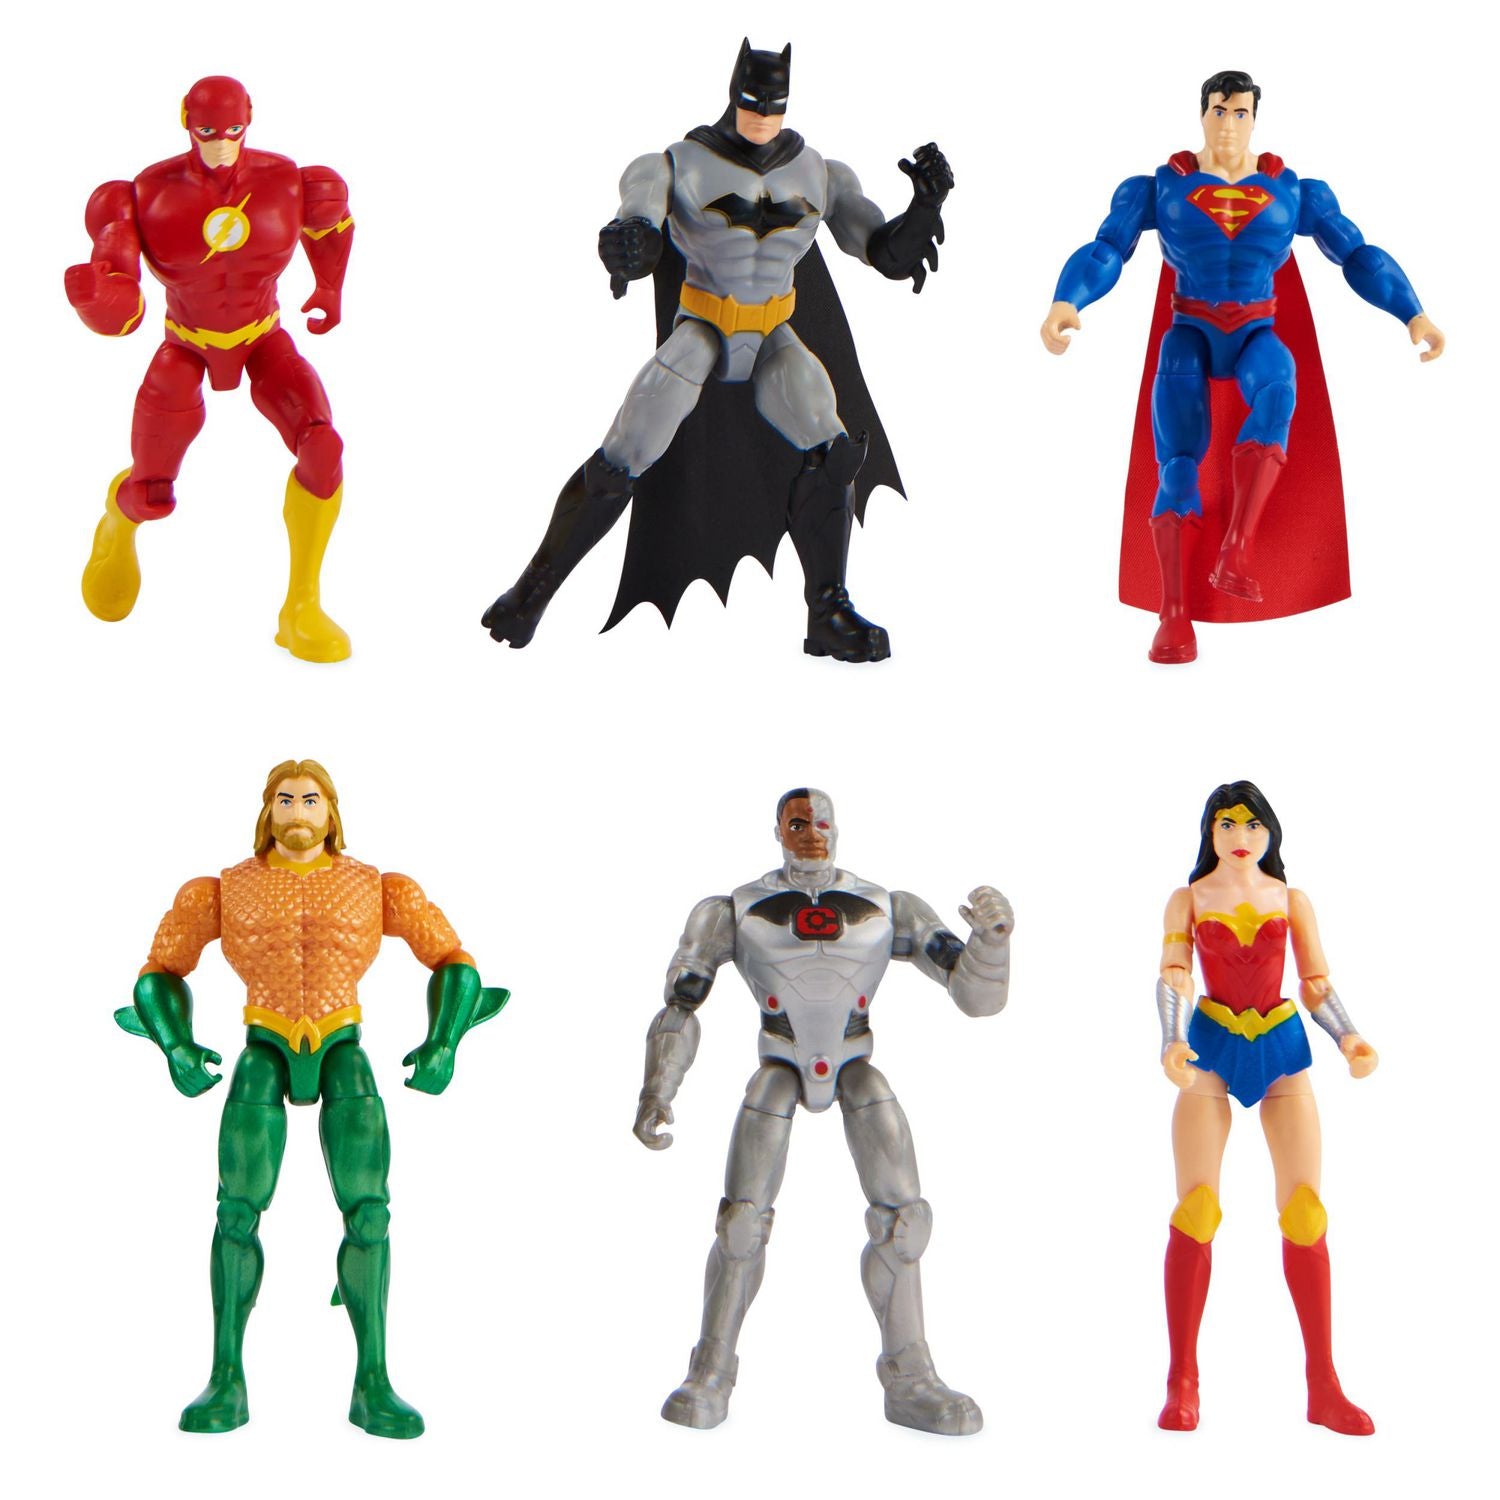 DC Justice League 6-Pack 4-inch Action Figures